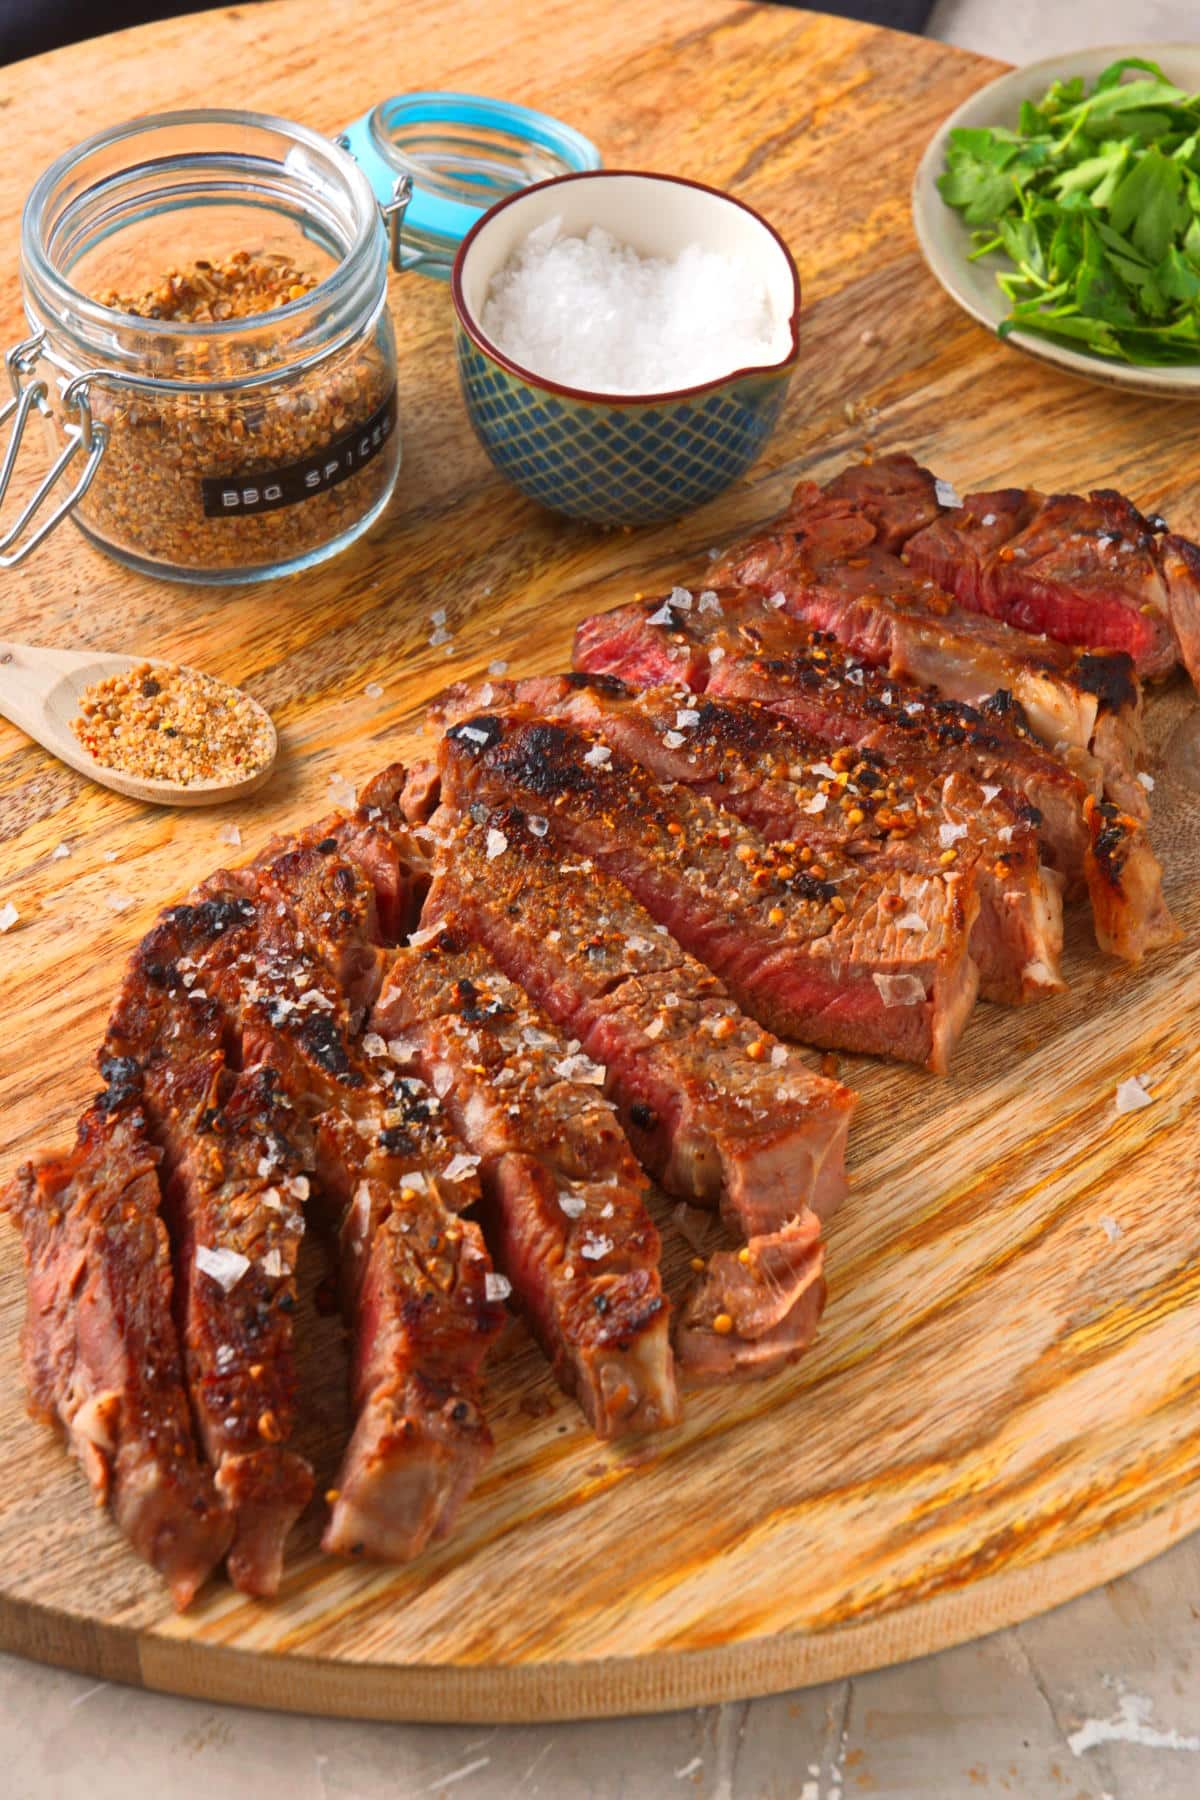 Grilled bison ribeye steak sliced on wooden serving board with spices on the side.